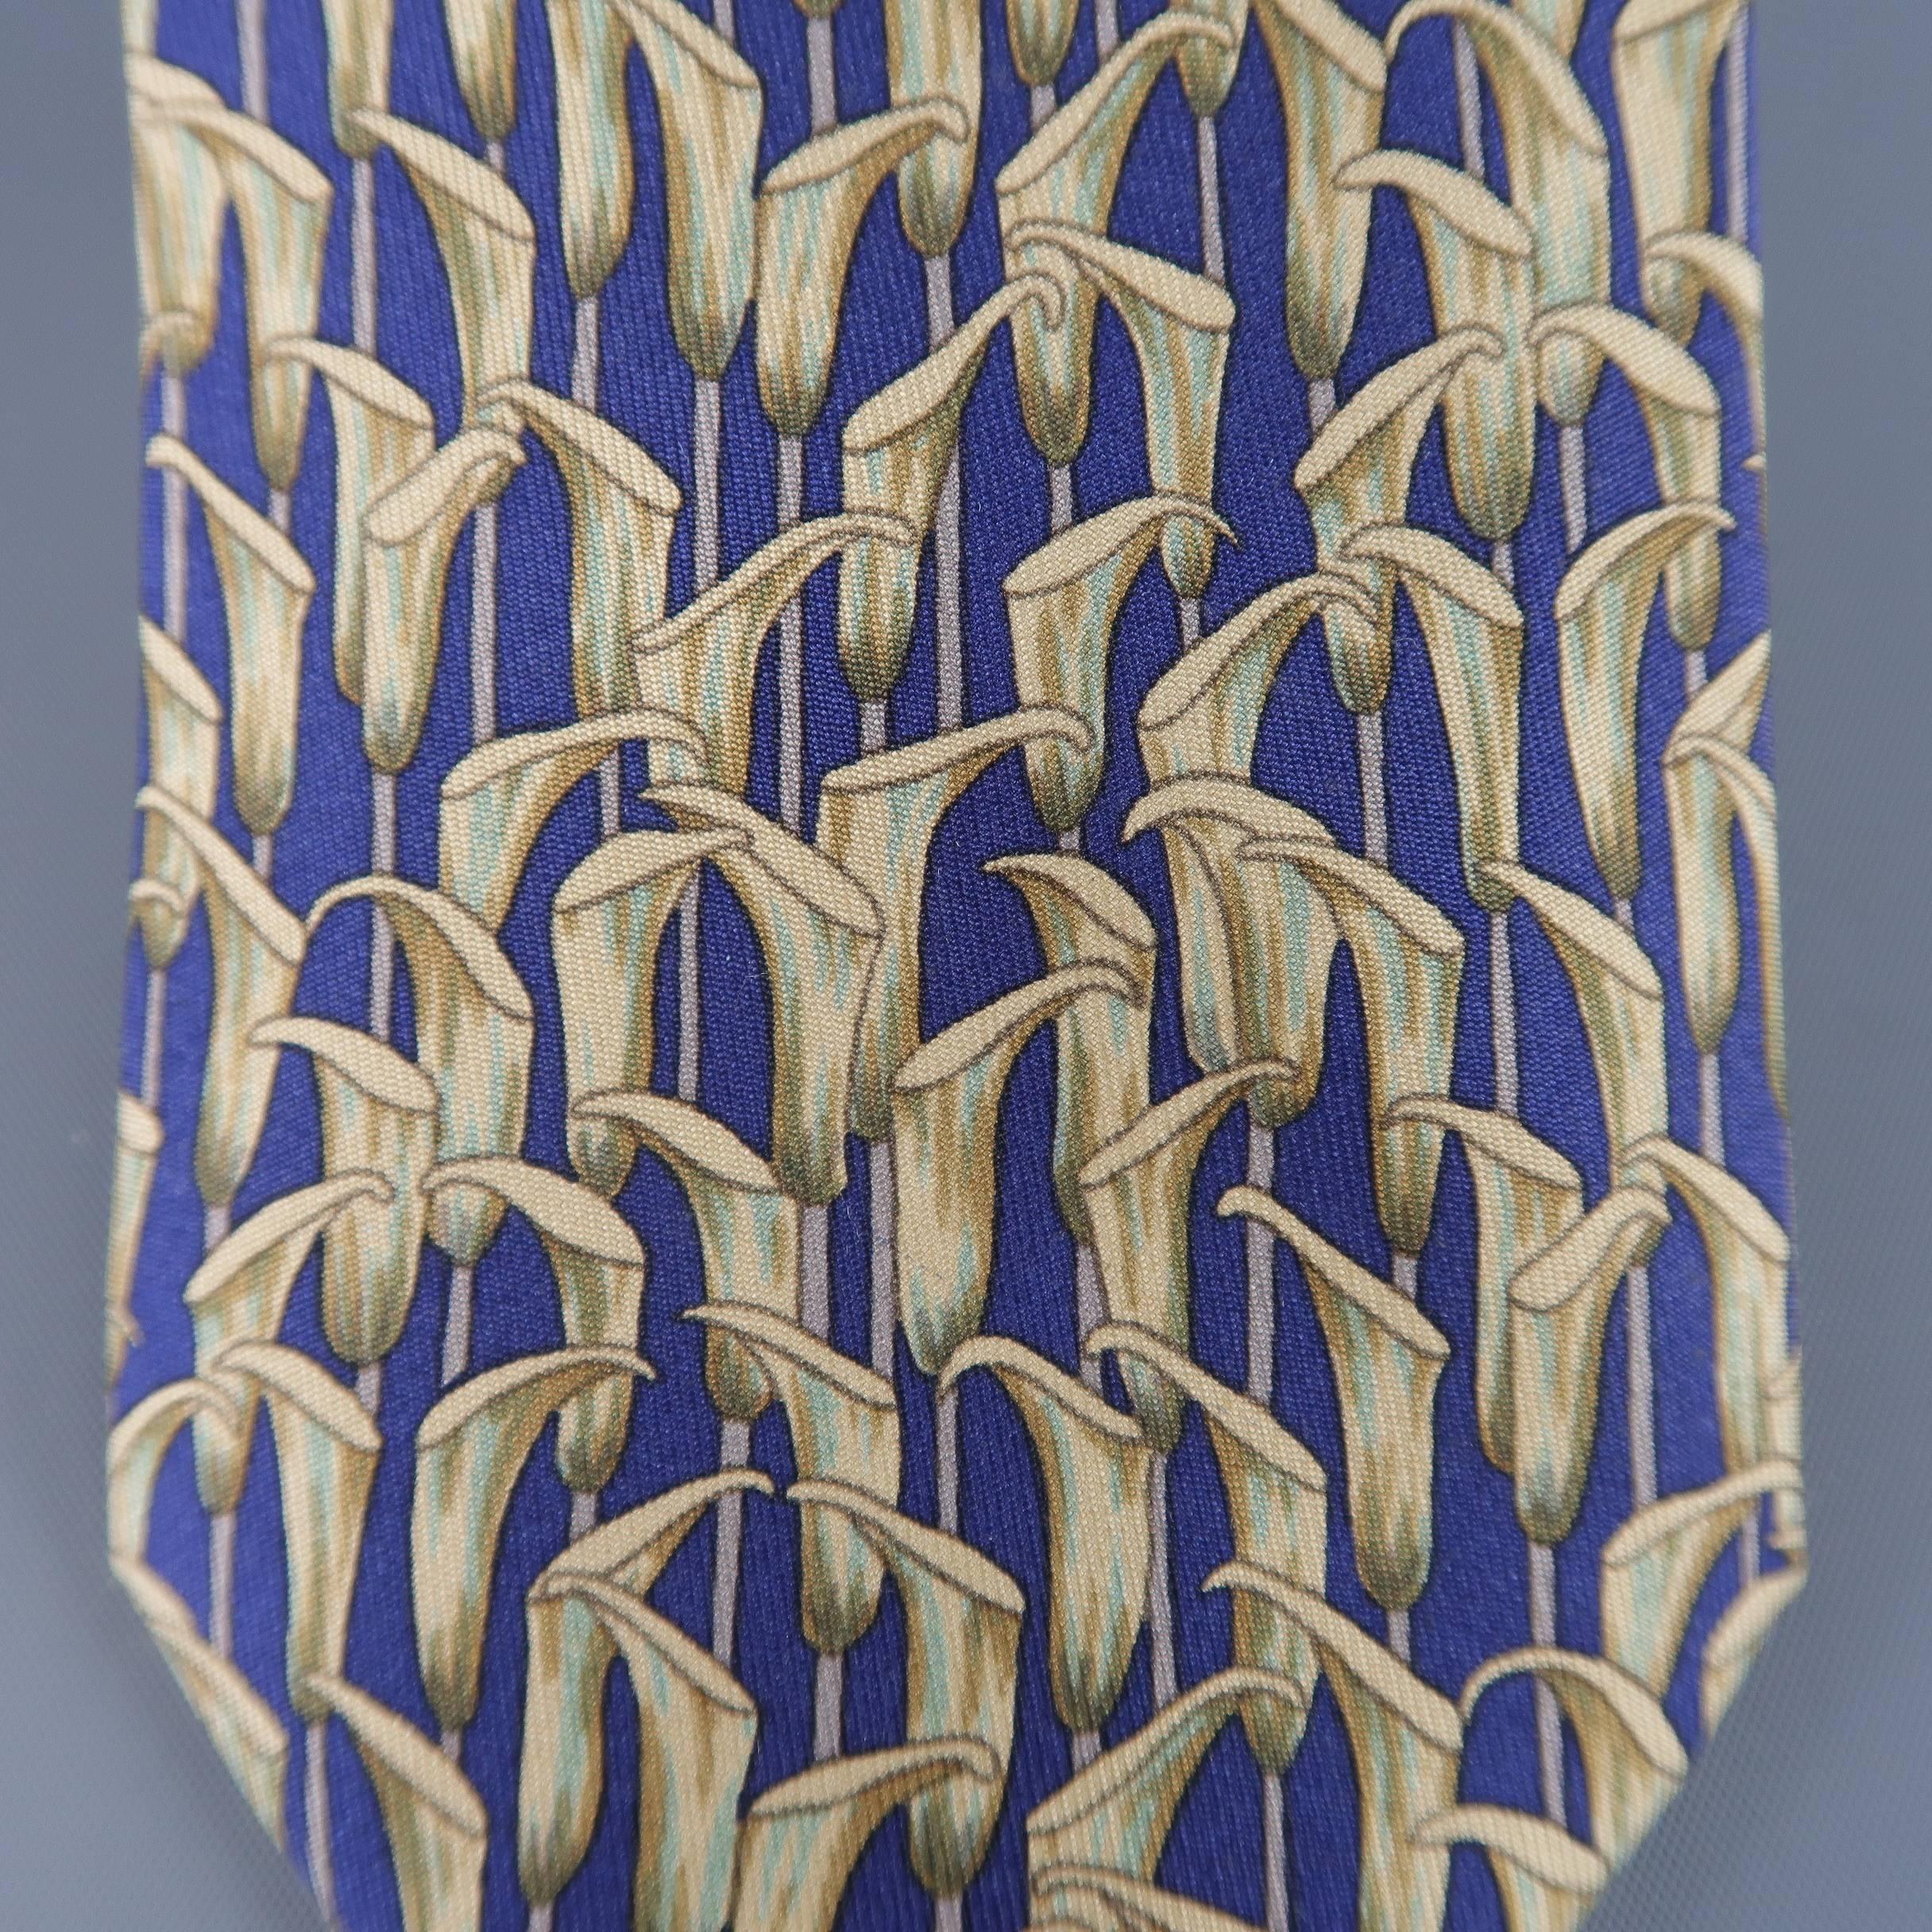 Vintage HERMES necktie comes in navy blue silk twill with all over beige calla lily print. Made in France.
 
Excellent Pre-Owned Condition.
 
Width: 3.25 in.
